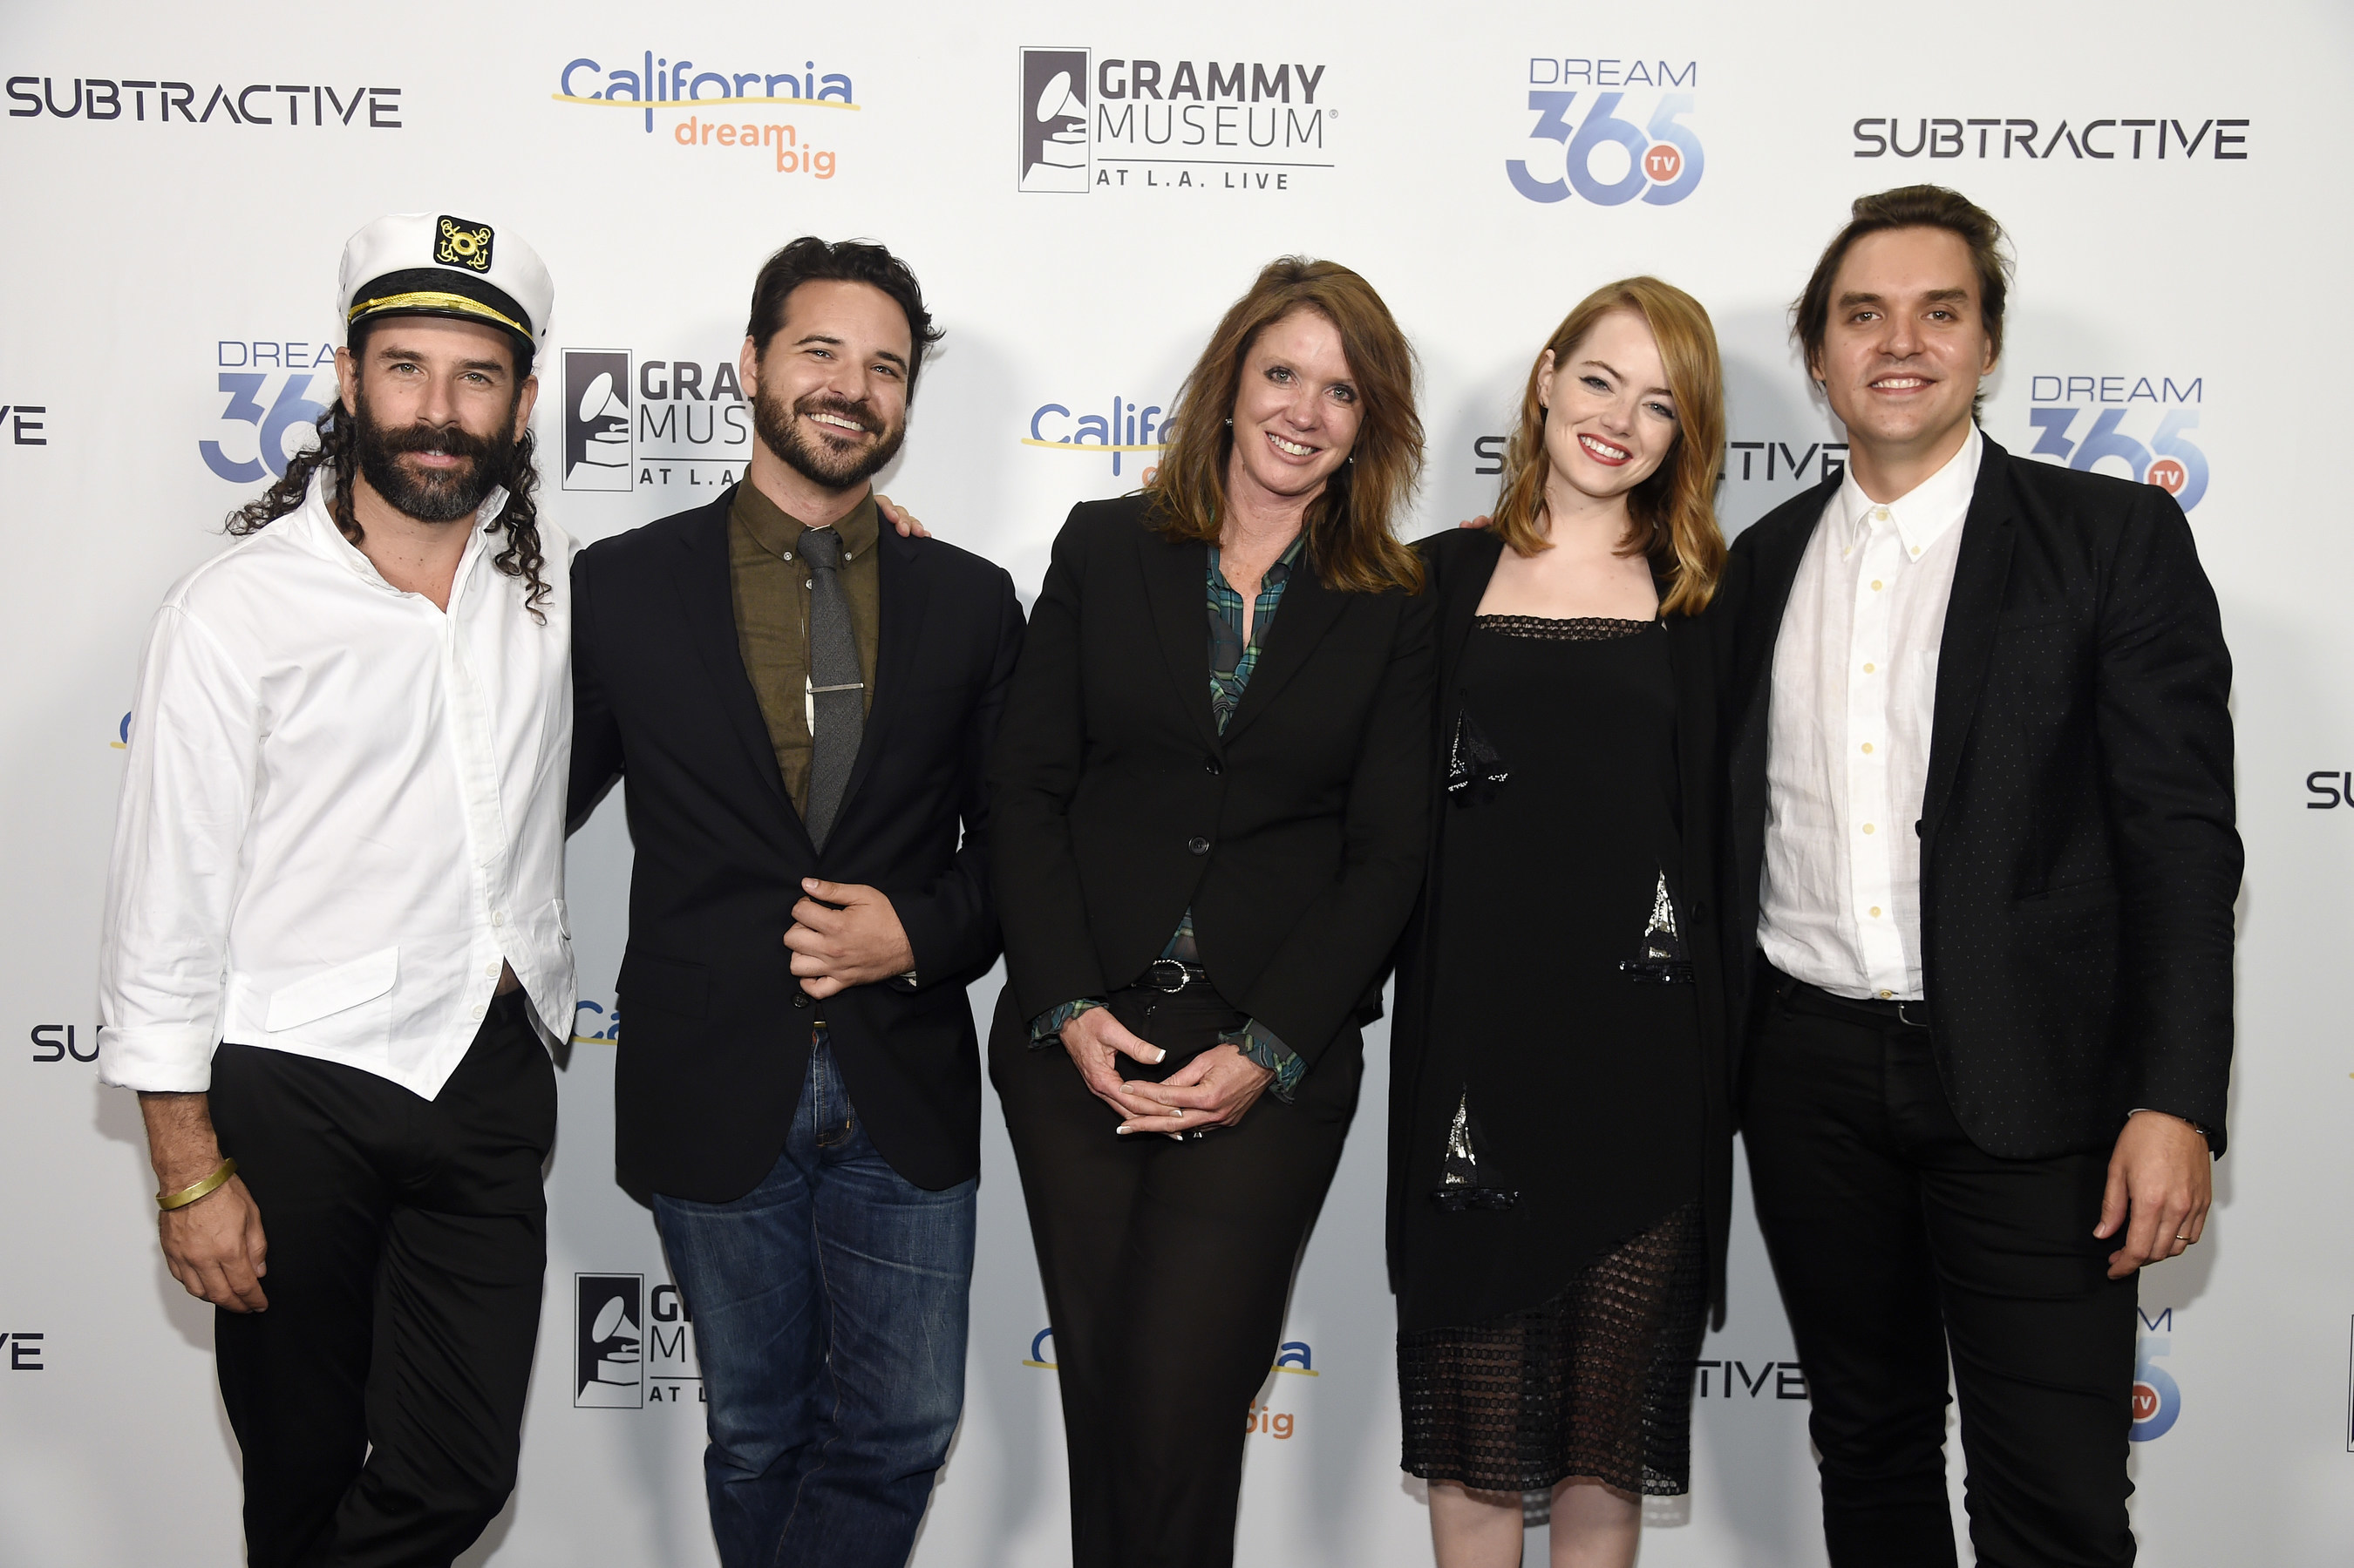 Caroline Beteta, center, president and CEO of Visit California, poses with, left to right, choreographer Ryan Heffington, director Brantley Gutierrez, actress Emma Stone and musician Will Butler at The GRAMMY Museum on Wednesday, Oct. 14, 2015, in Los Angeles. Beteta led a panel discussion after Visit California premiered their latest California Dreamers video "Dream of Dance," which explores Heffington's creative world and Golden State inspiration. (Photo by Chris Pizzello/Invision for Visit California/AP)